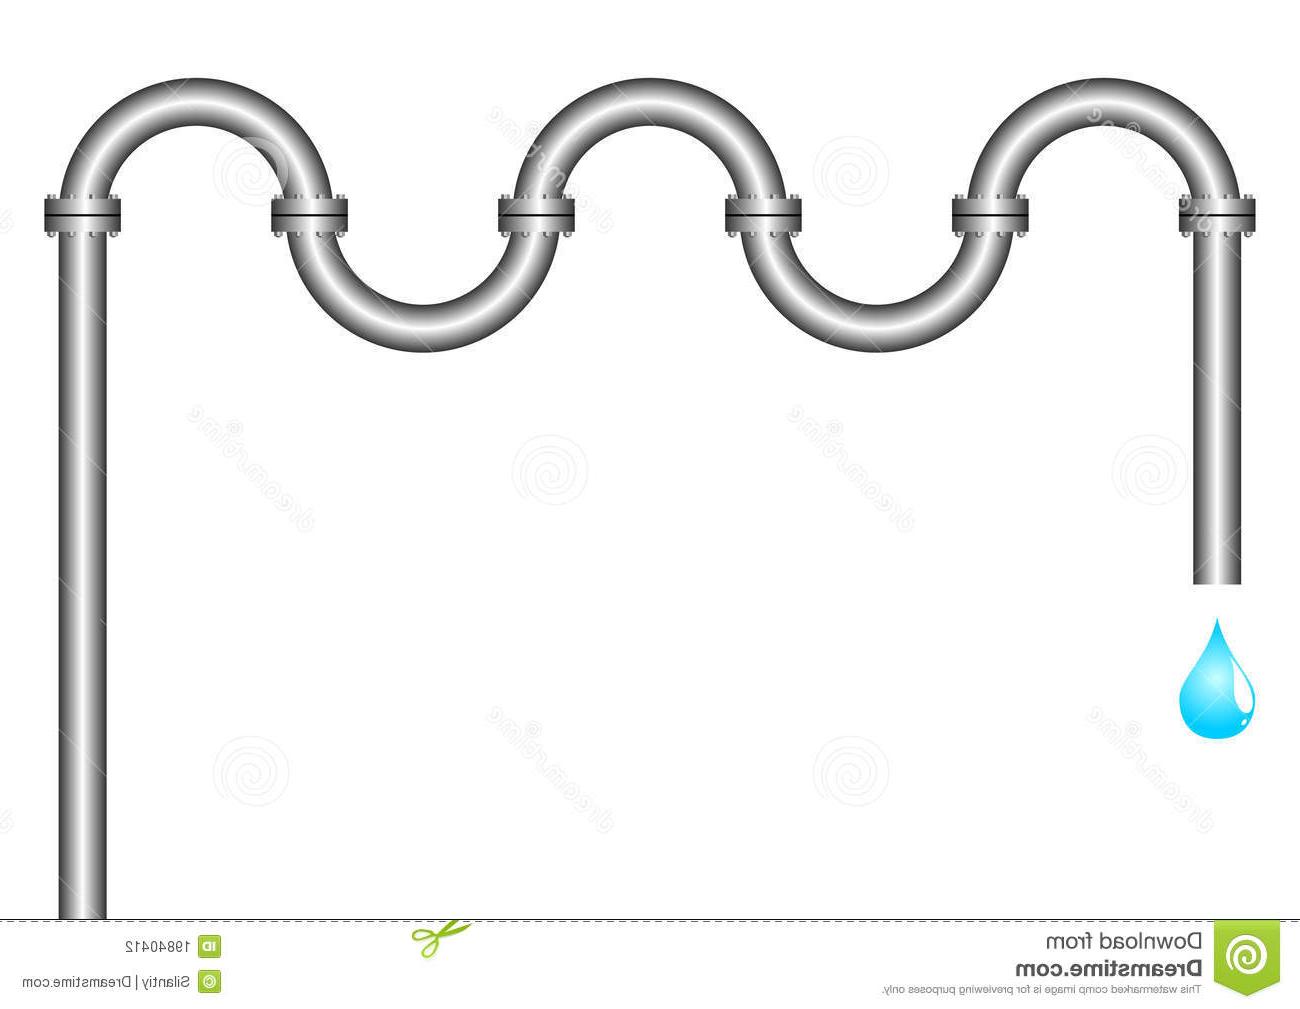 pipe clipart piping